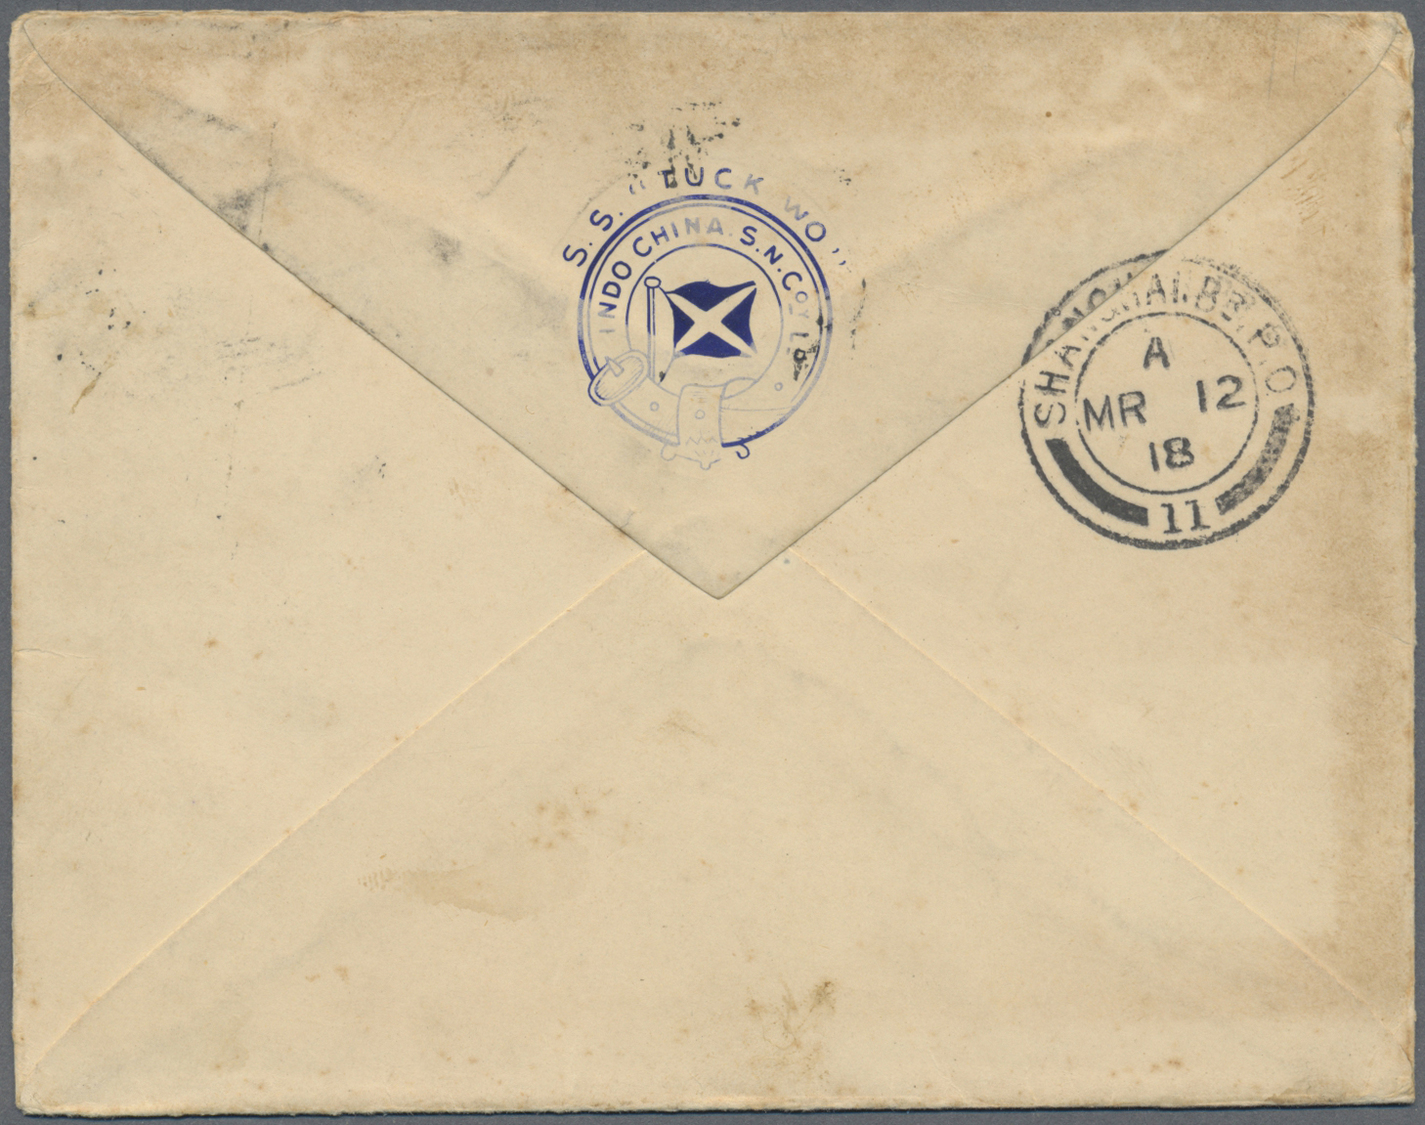 Br Hongkong - Britische Post In China: 1918. Envelope (a Few Spots) Written From 'S.S. "Tuck Wo" Near Hankow' Dated 5th - Covers & Documents